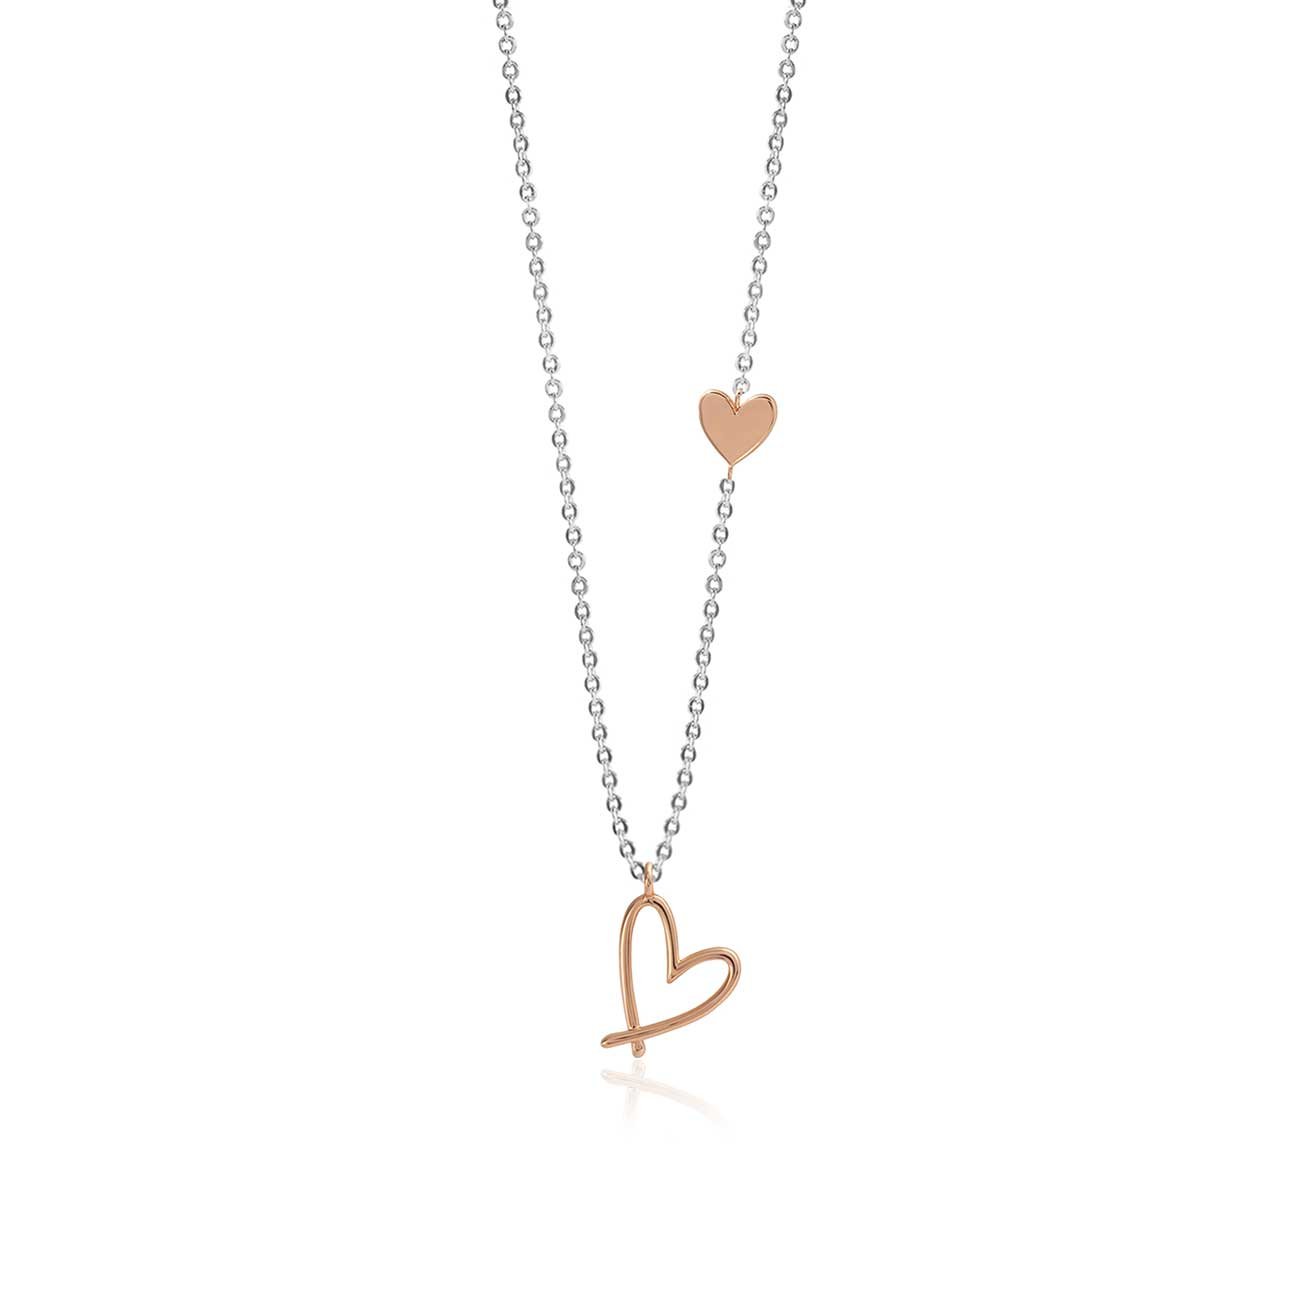 Joma Jewellery Florrie Heart Necklace | More Than Just A Gift | Authorised Joma Jewellery Stockist| More Than Just A Gift